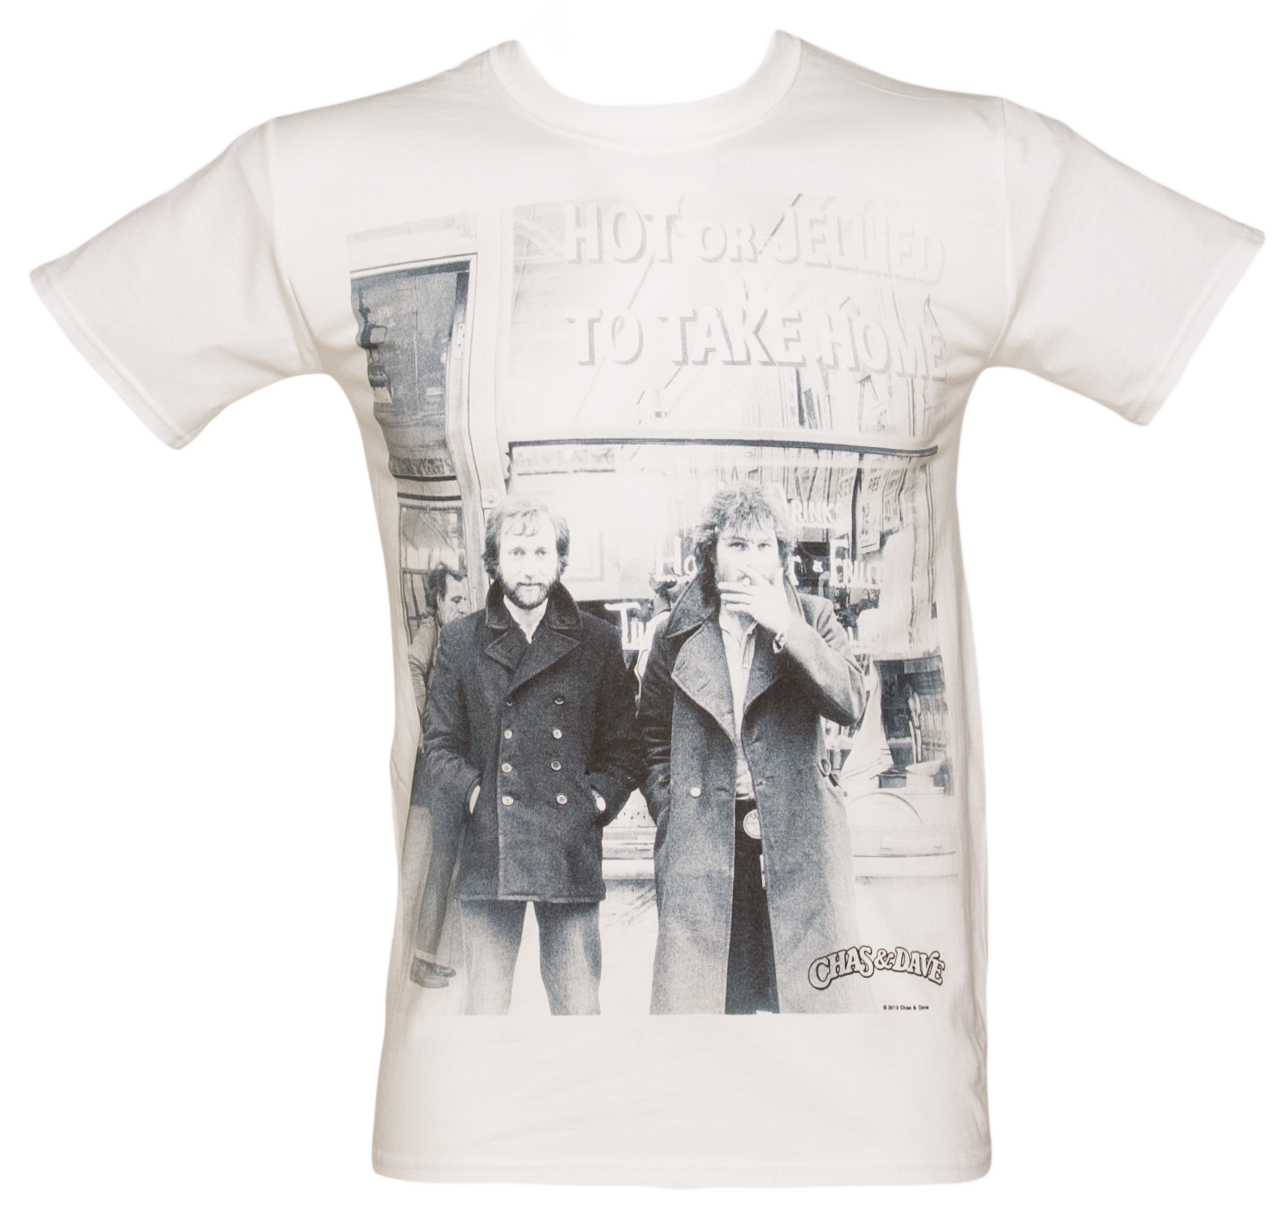 Mens Chas and Dave Hot Or Jellied T-Shirt